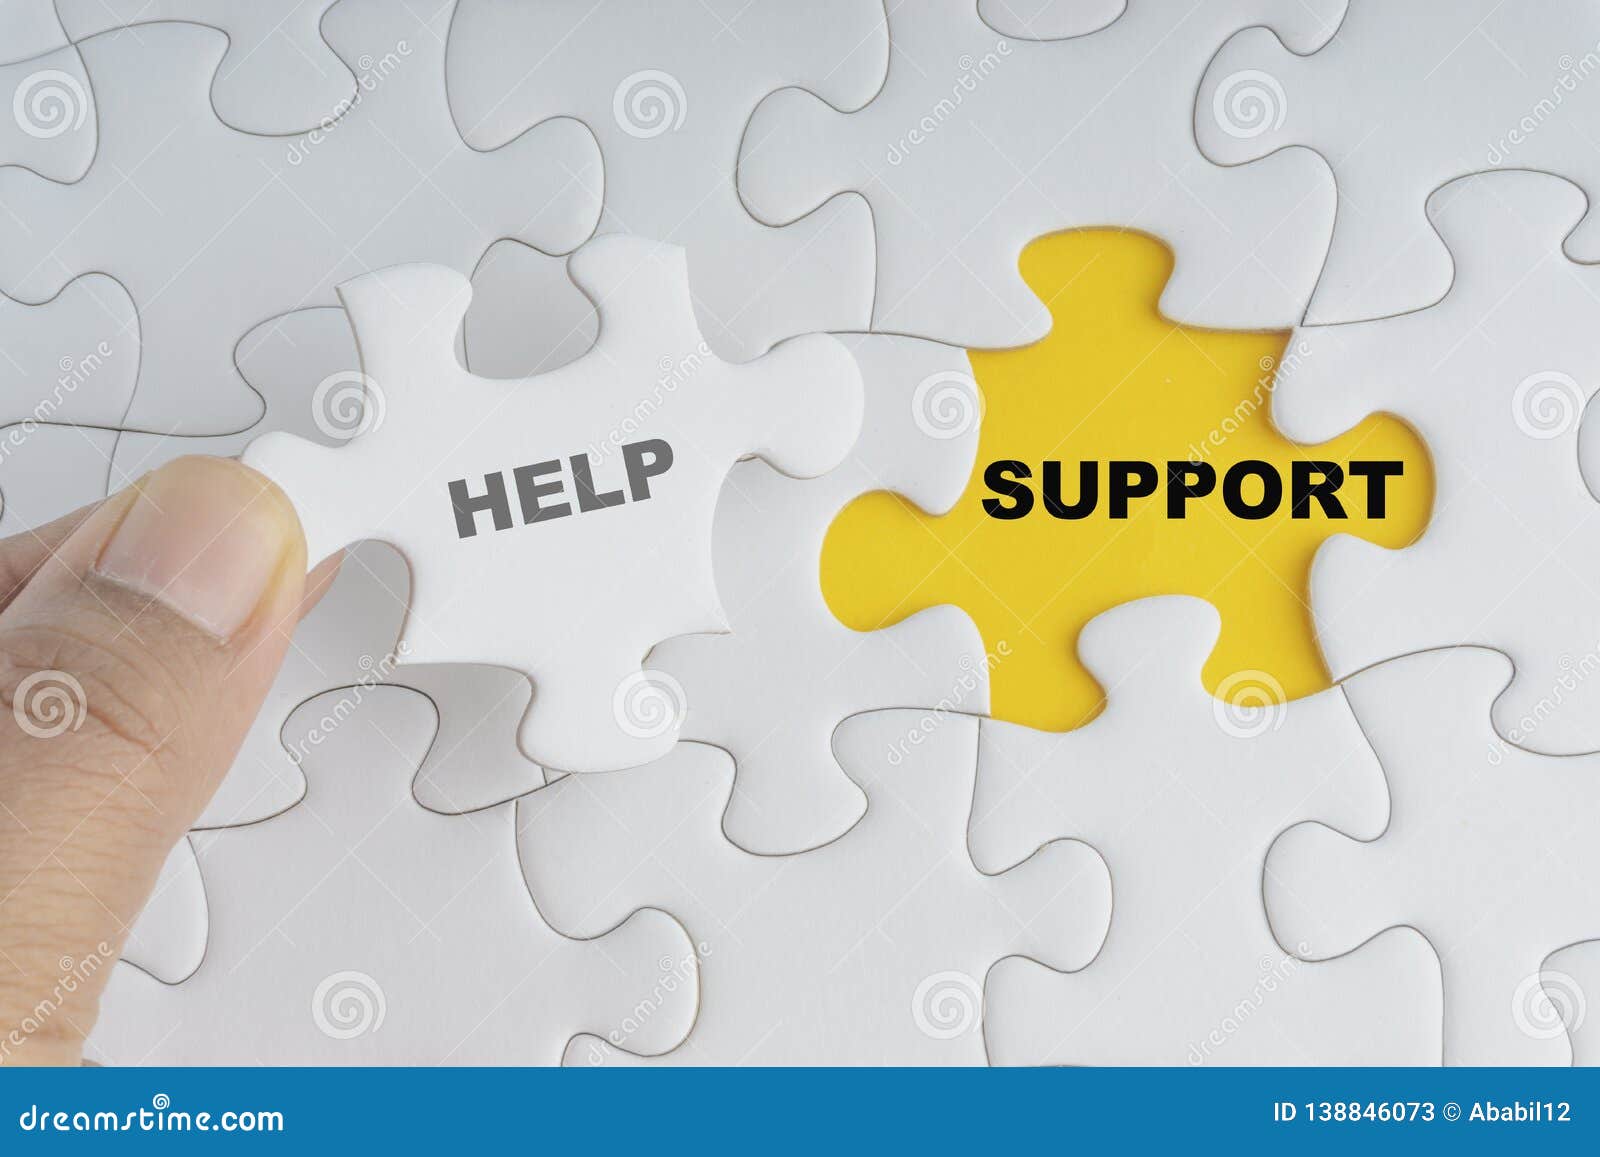 Hand Holding Piece of Jigsaw Puzzle with Word HELP SUPPORT. Stock Image -  Image of marketing, idea: 138846073